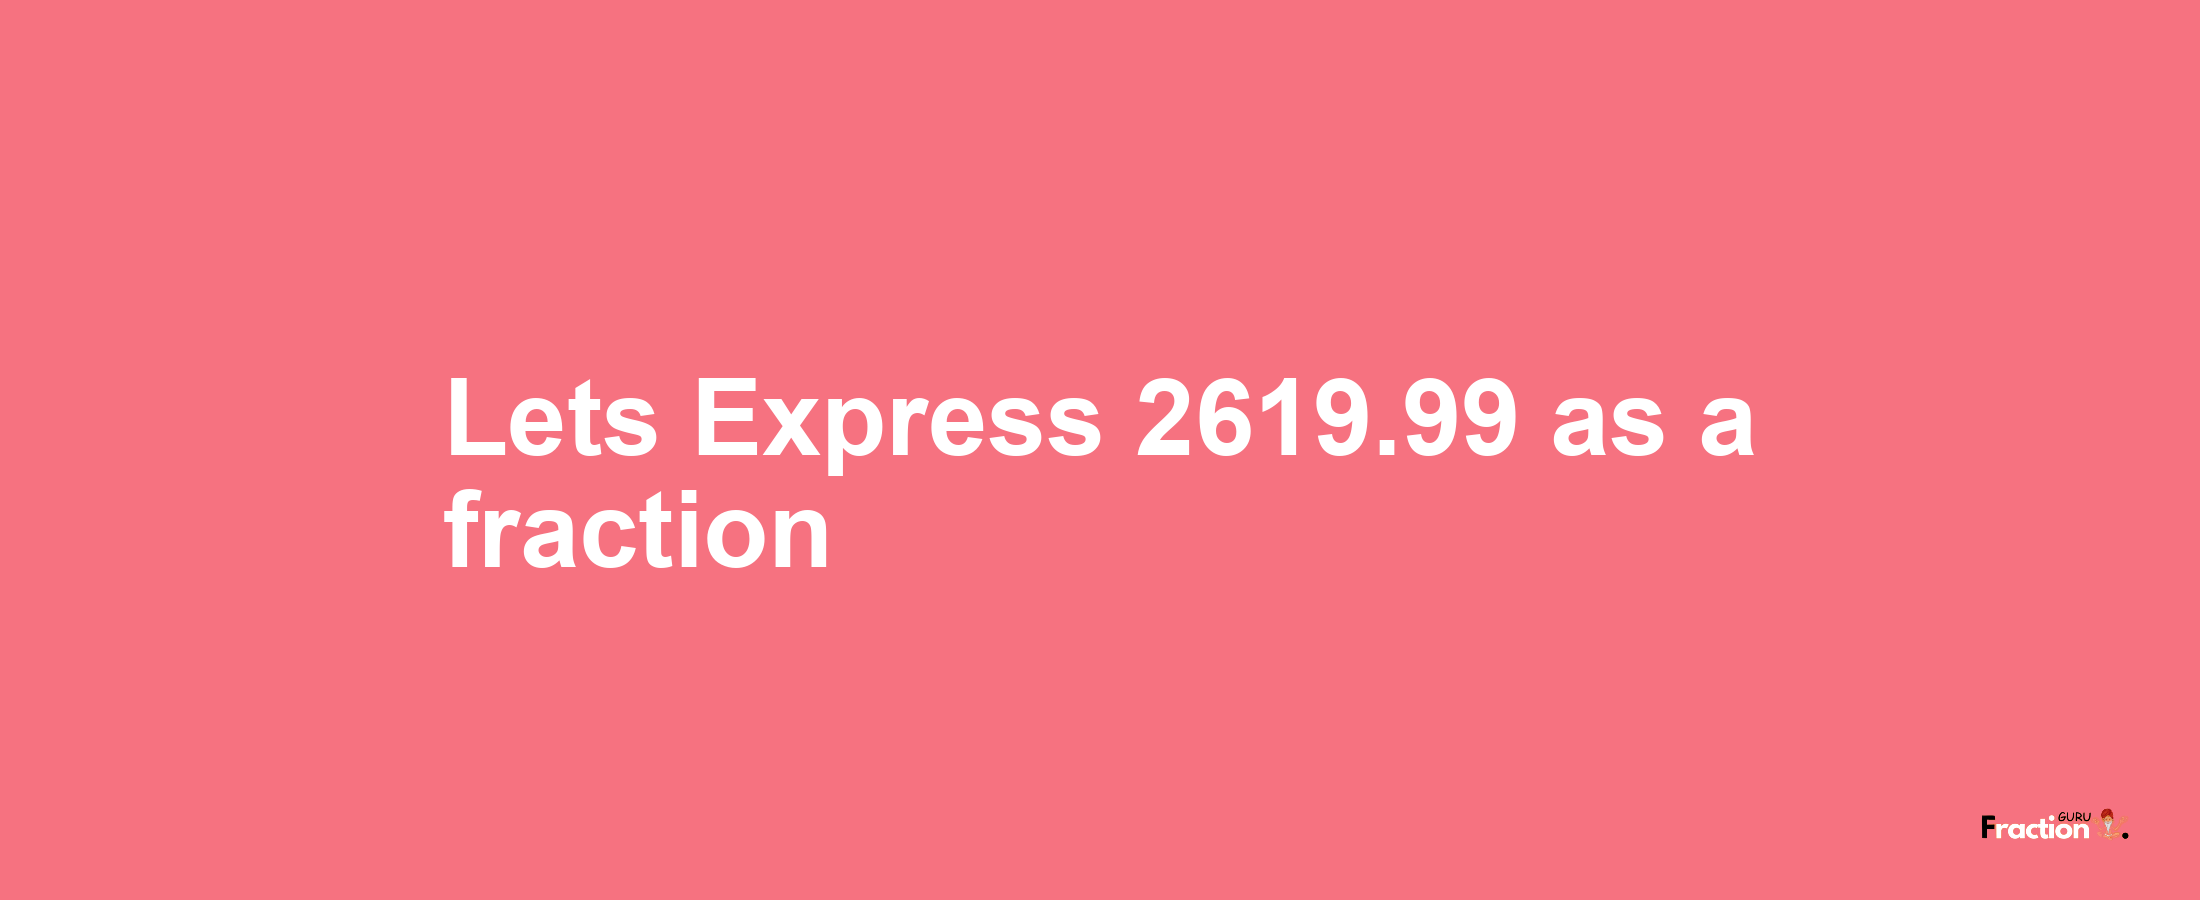 Lets Express 2619.99 as afraction